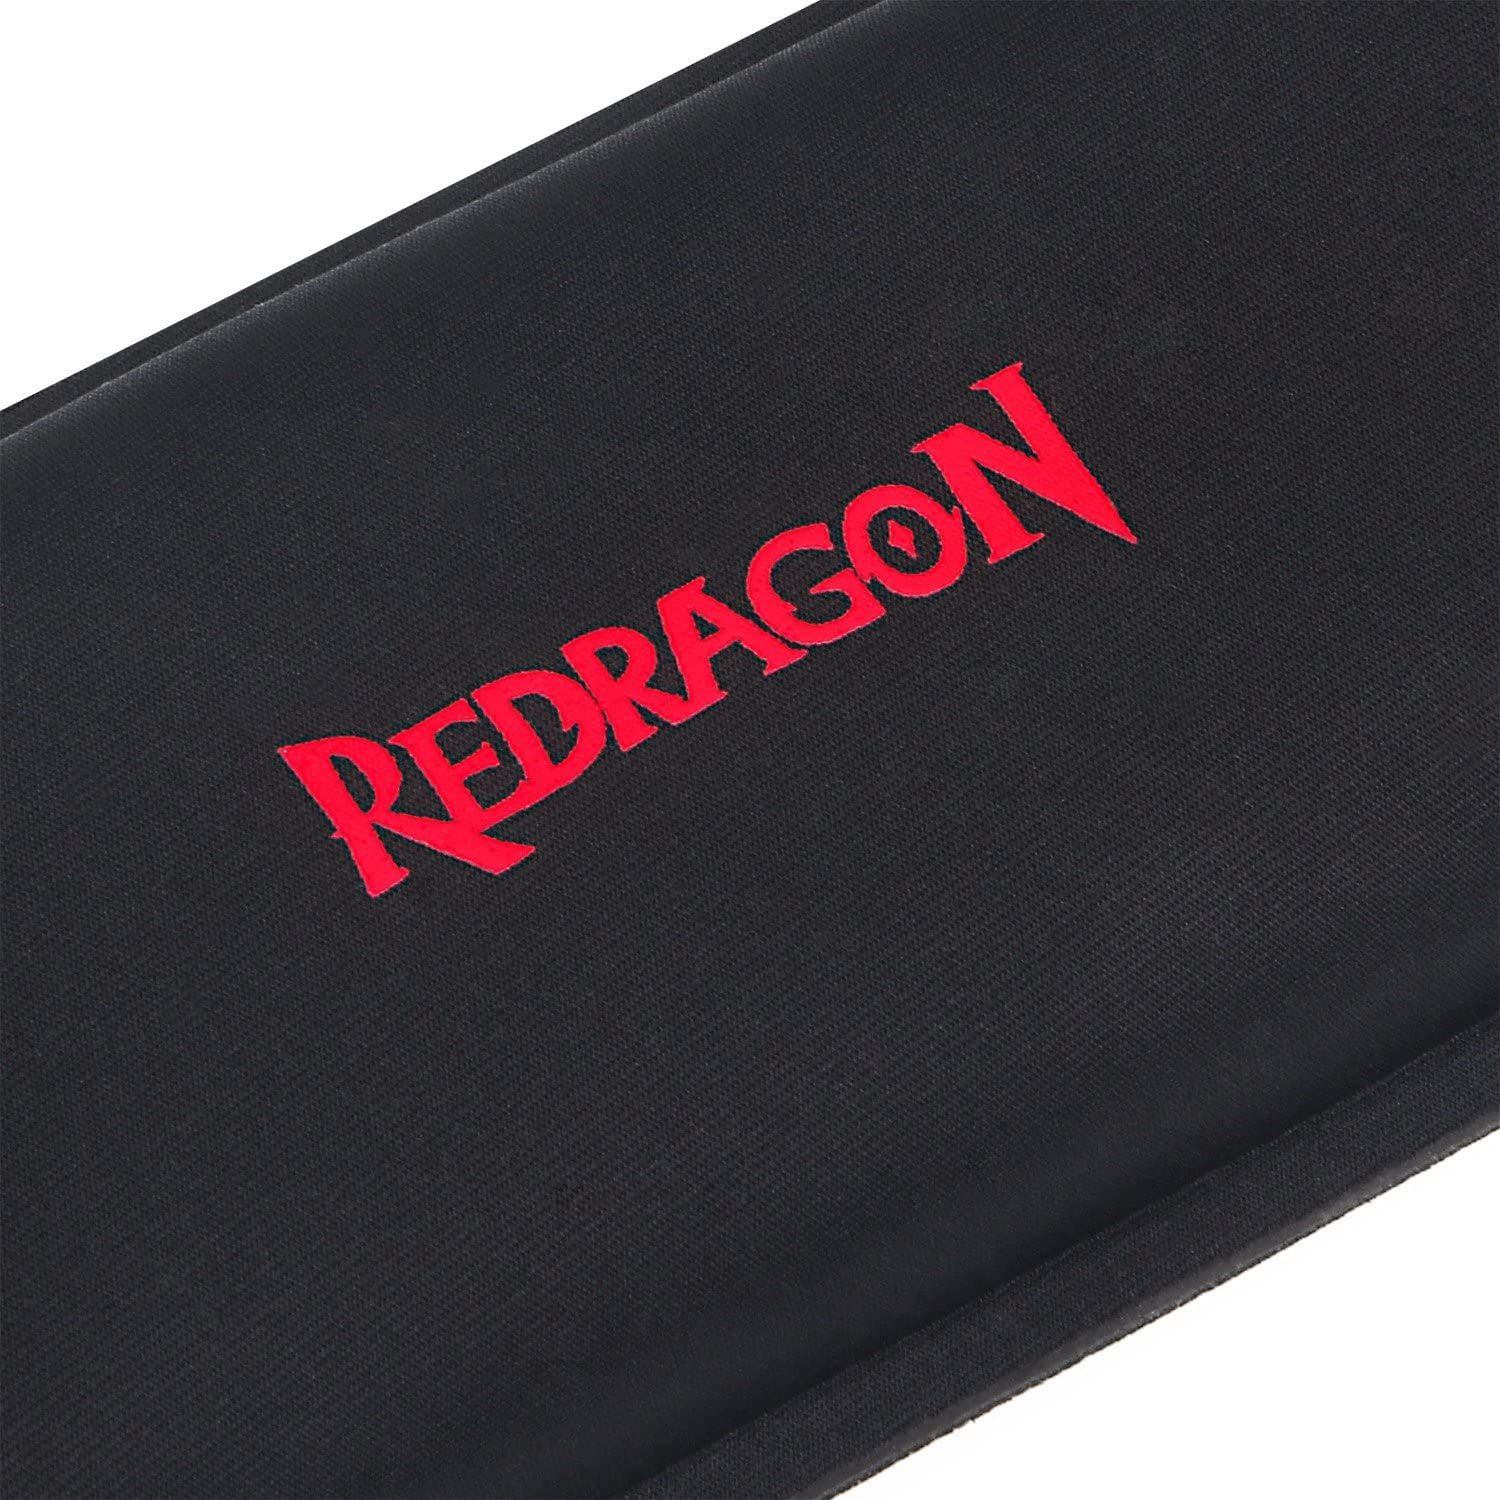 Close-up view of a Redragon wrist rest.